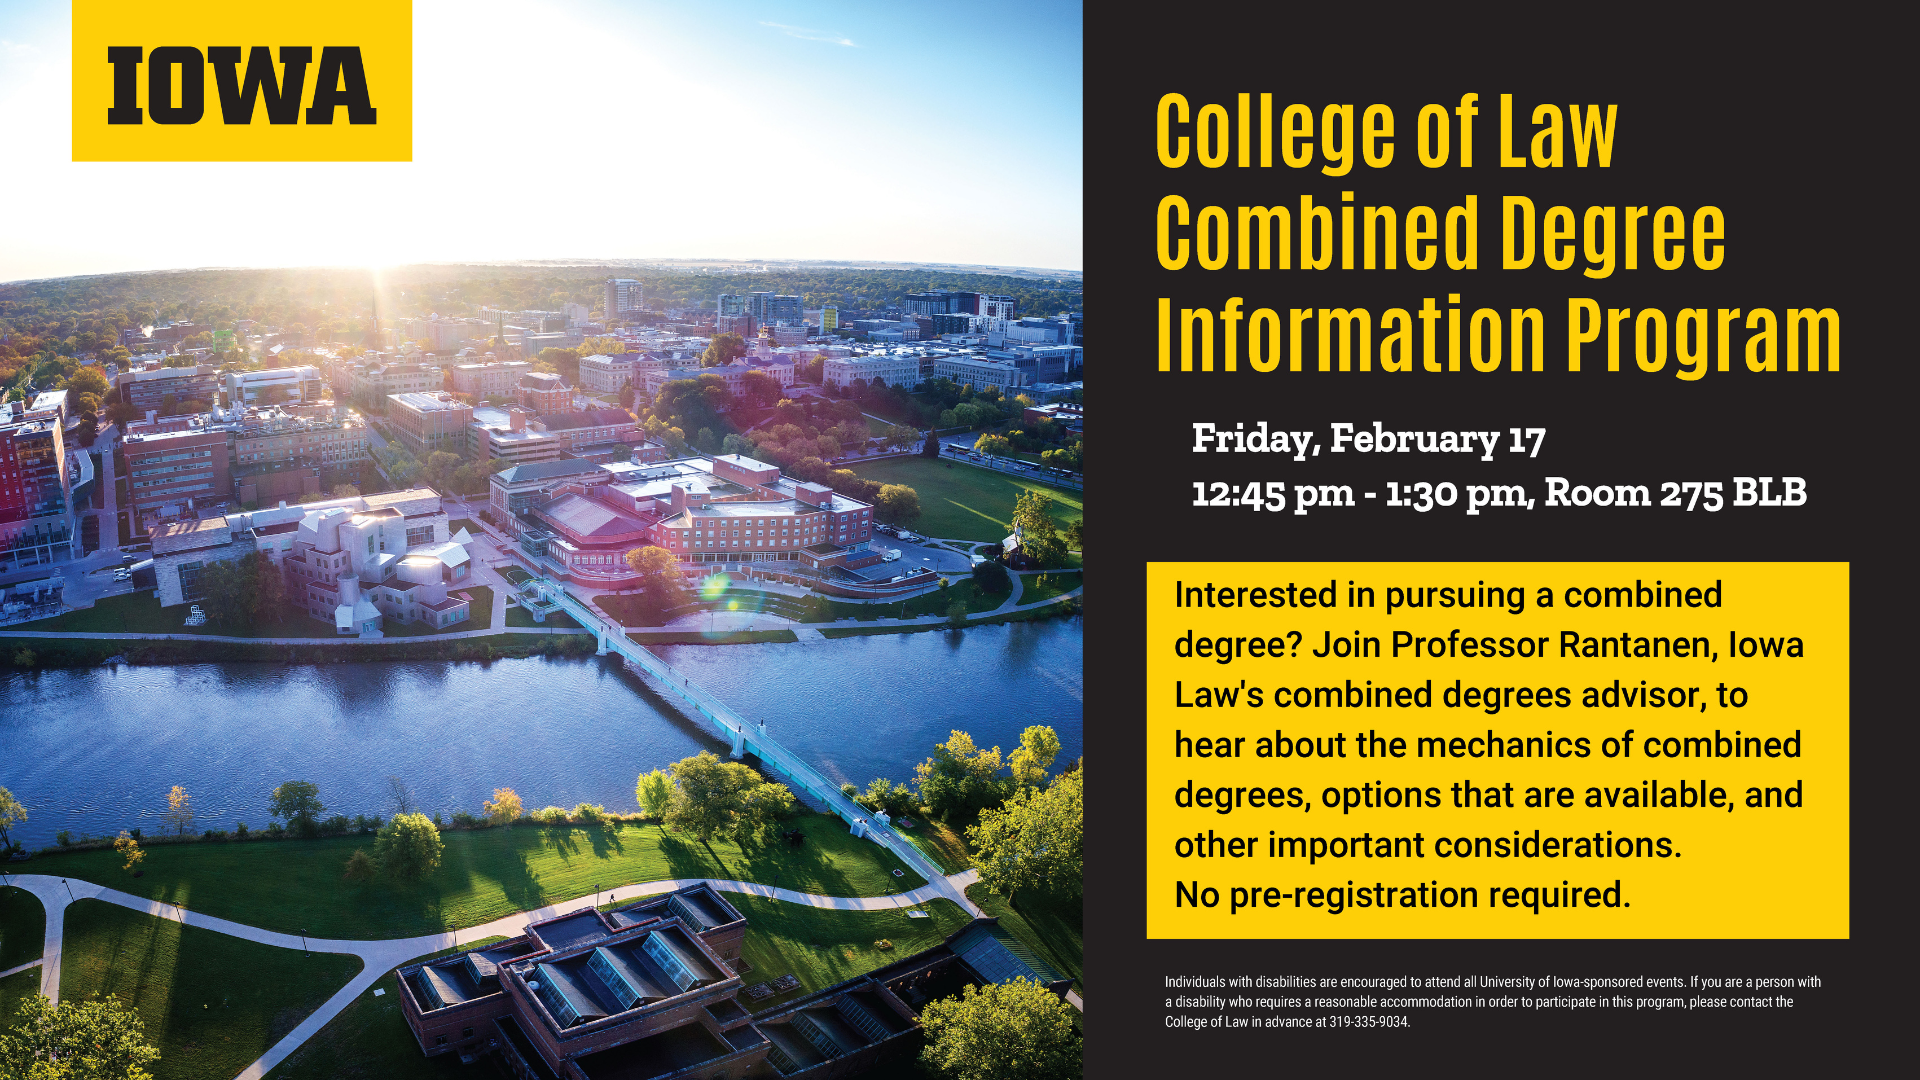  College of Law Combined Degree Information Program    Friday, February 17    12:45 pm - 1:30 pm, Room 275 BLB    Interested in pursuing a combined degree? Join Professor Rantanen, Iowa    Law's combined degrees advisor, to hear about the mechanics of combined degrees, options that are available, and other important considerations.    No pre-registration required.    Individuals with disabilities are encouraged to attend all University of Iowa-sponsored events. If you are a person with a disability who requires a reasonable accommodation in order to participate in this program, please contact the College of Law in advance at 319-335-9034.